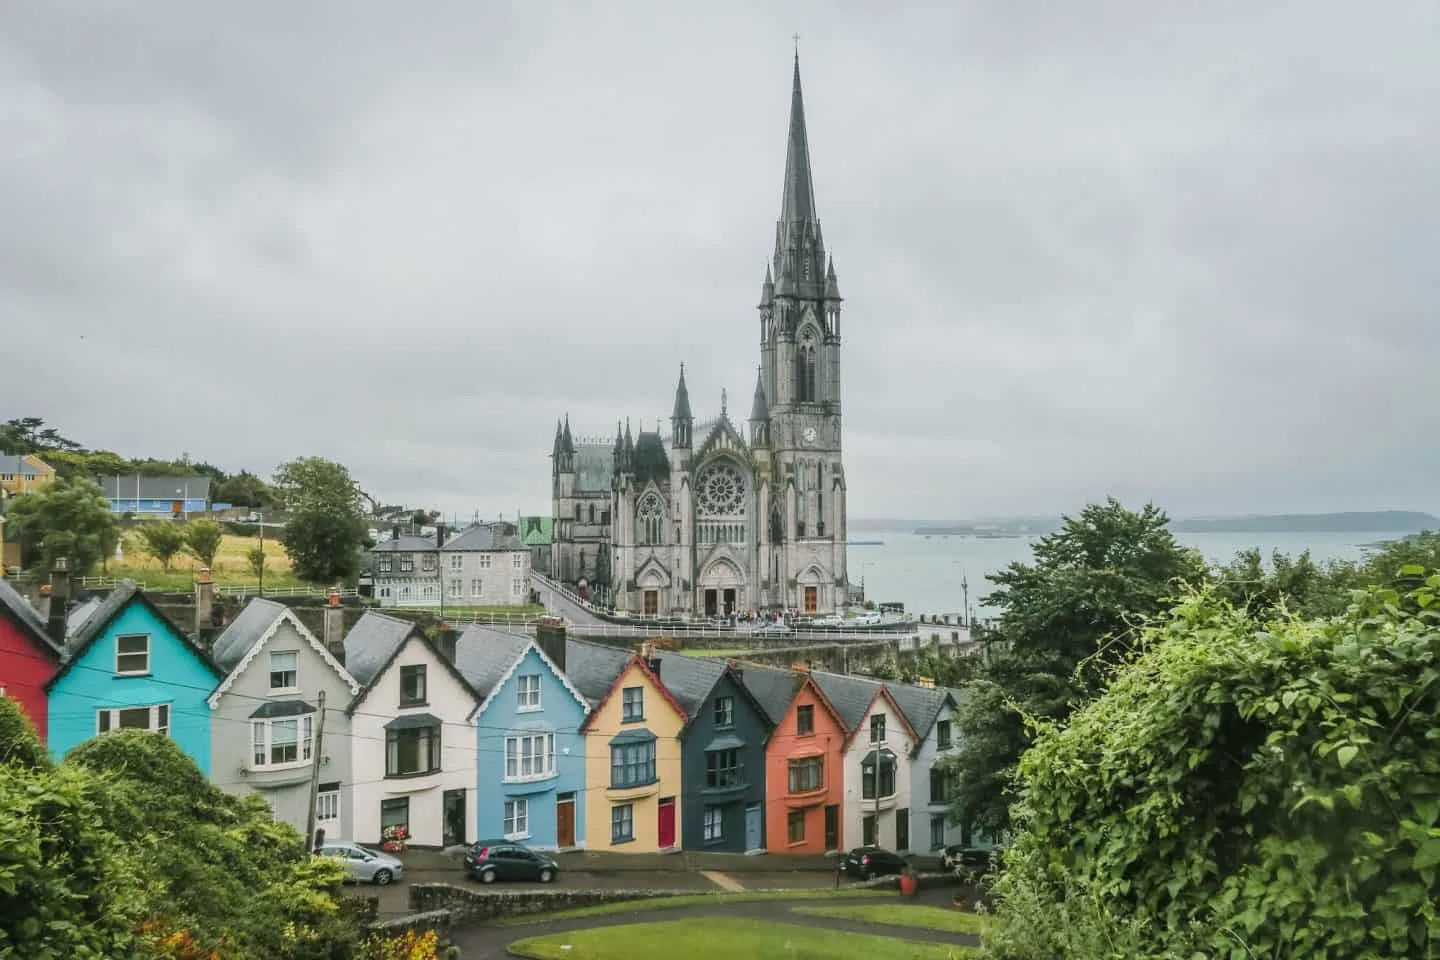 Cobh is an adorable small town worth adding to your 2 week Ireland road trip itinerary